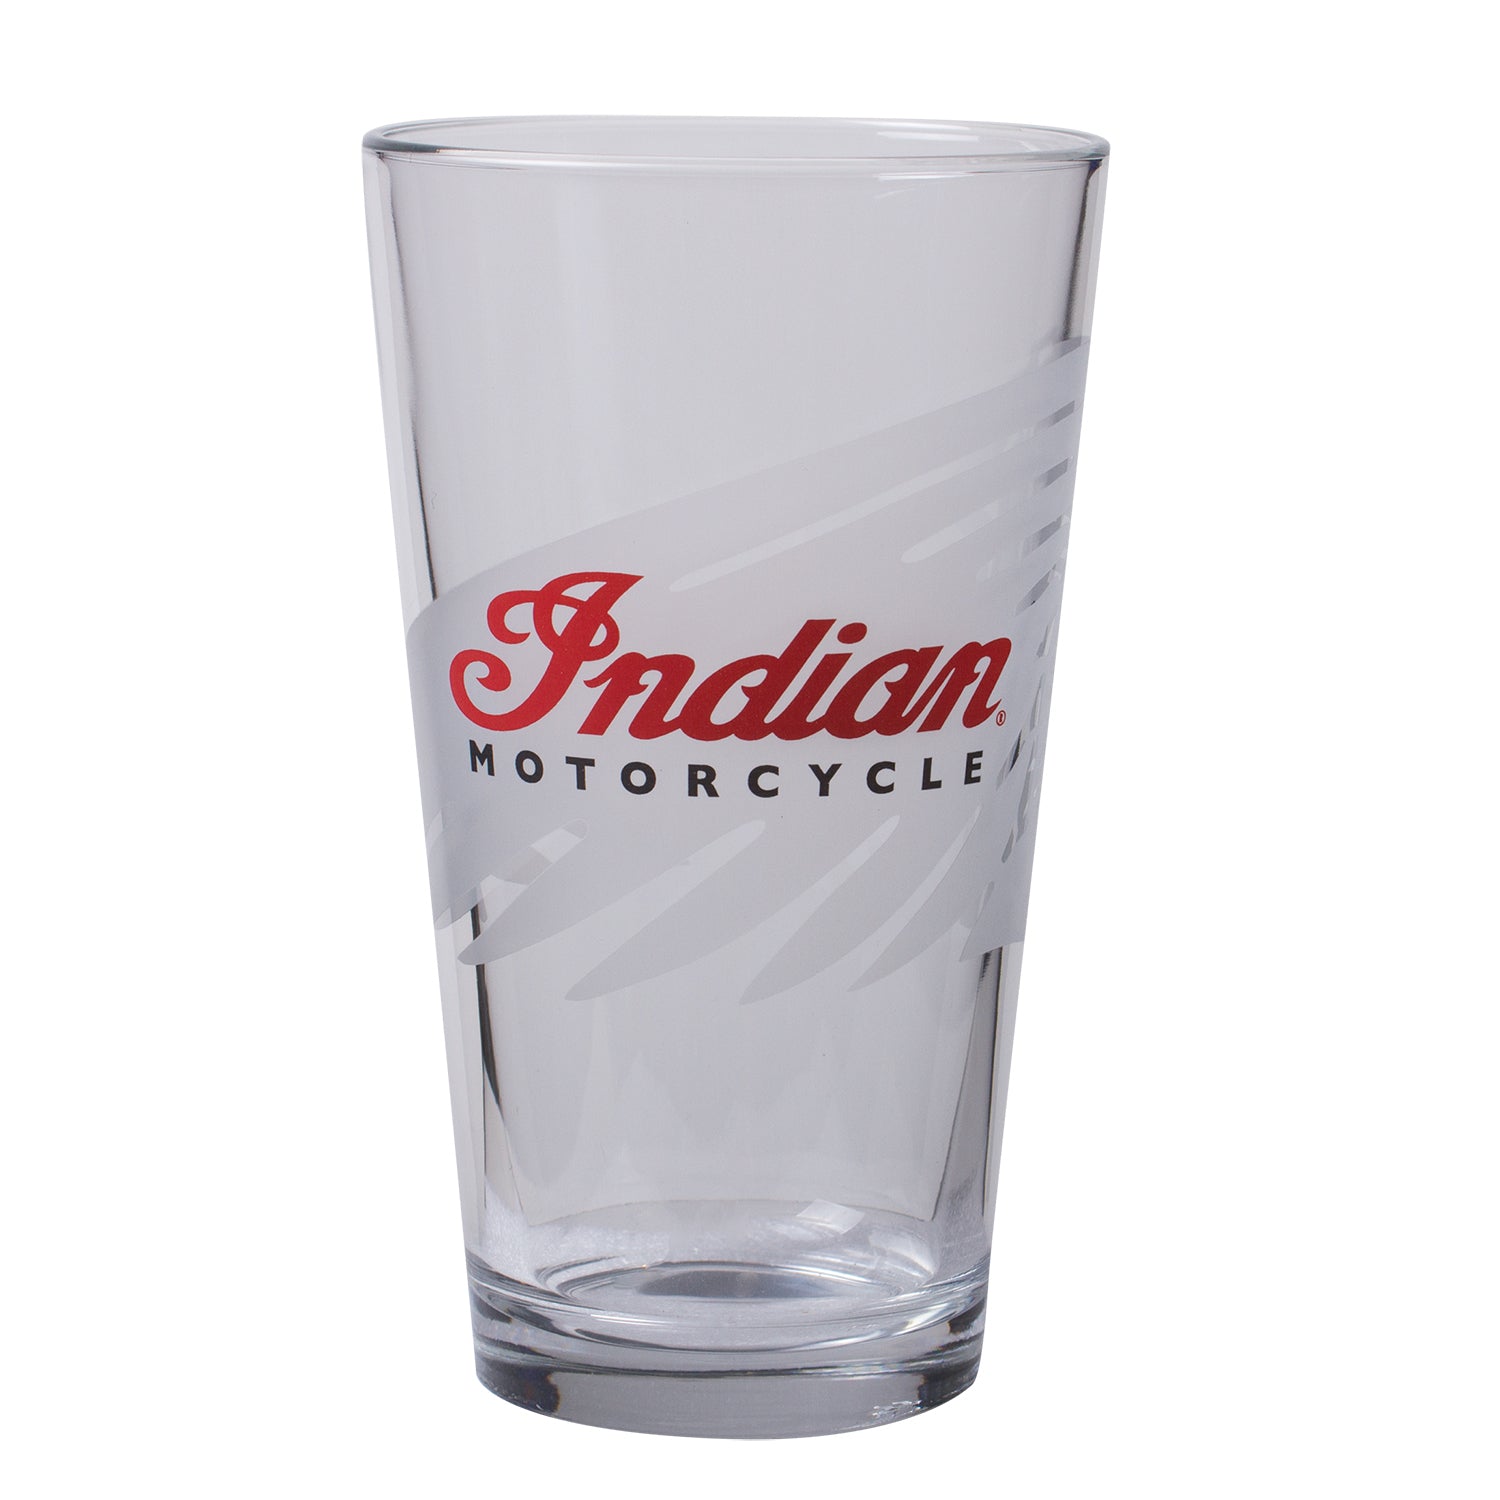 Indian Motorcycle Glasses, 2 Pack